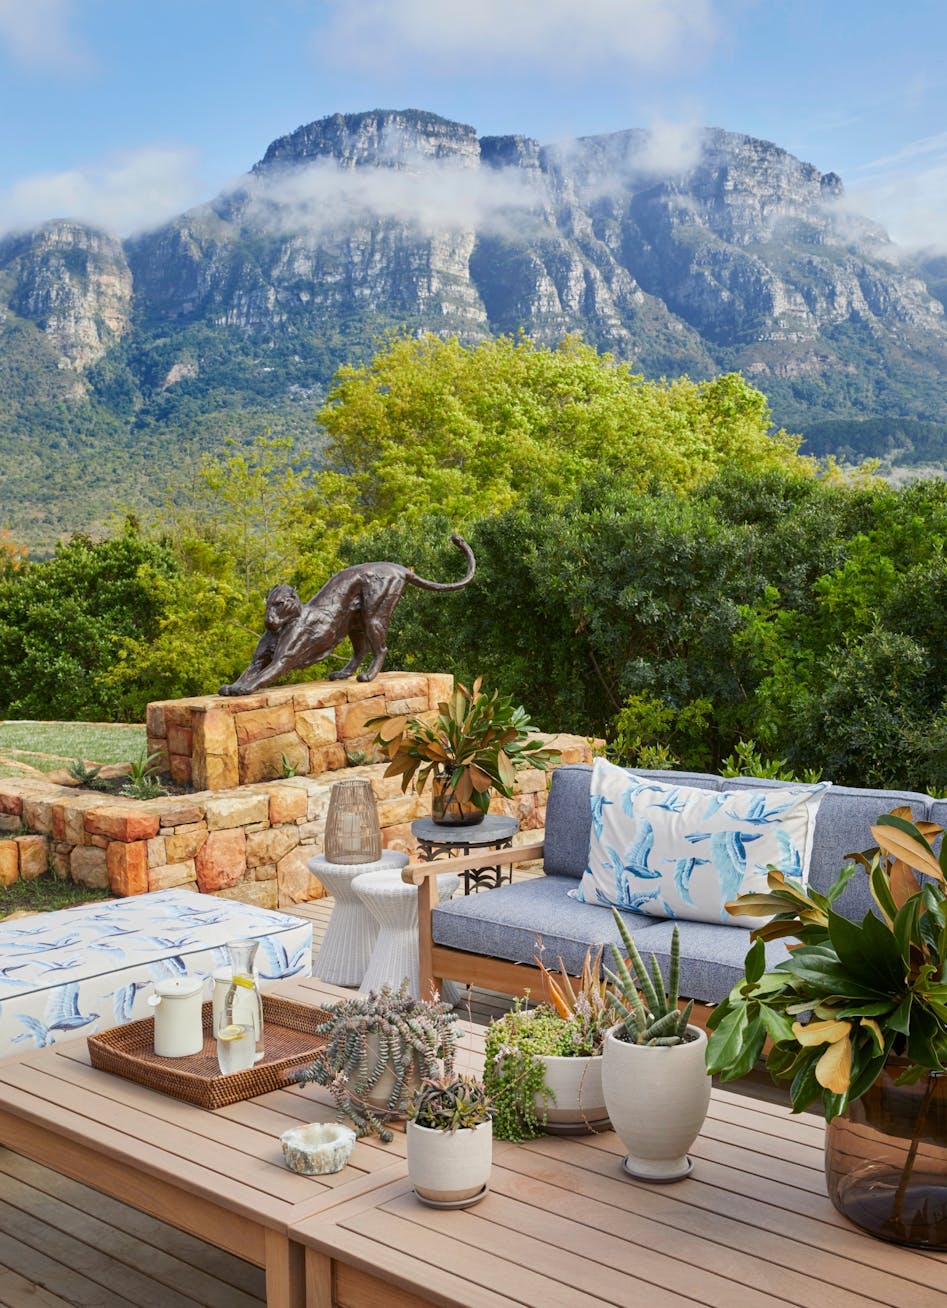 An outdoor seating area with mountain views holds a number of wooden-framed sofas, a central table holding a collection of potted succulents, and a few side tables made of wood, metal and other materials. A metal sculpture of a stretching big cat is visible to the left.